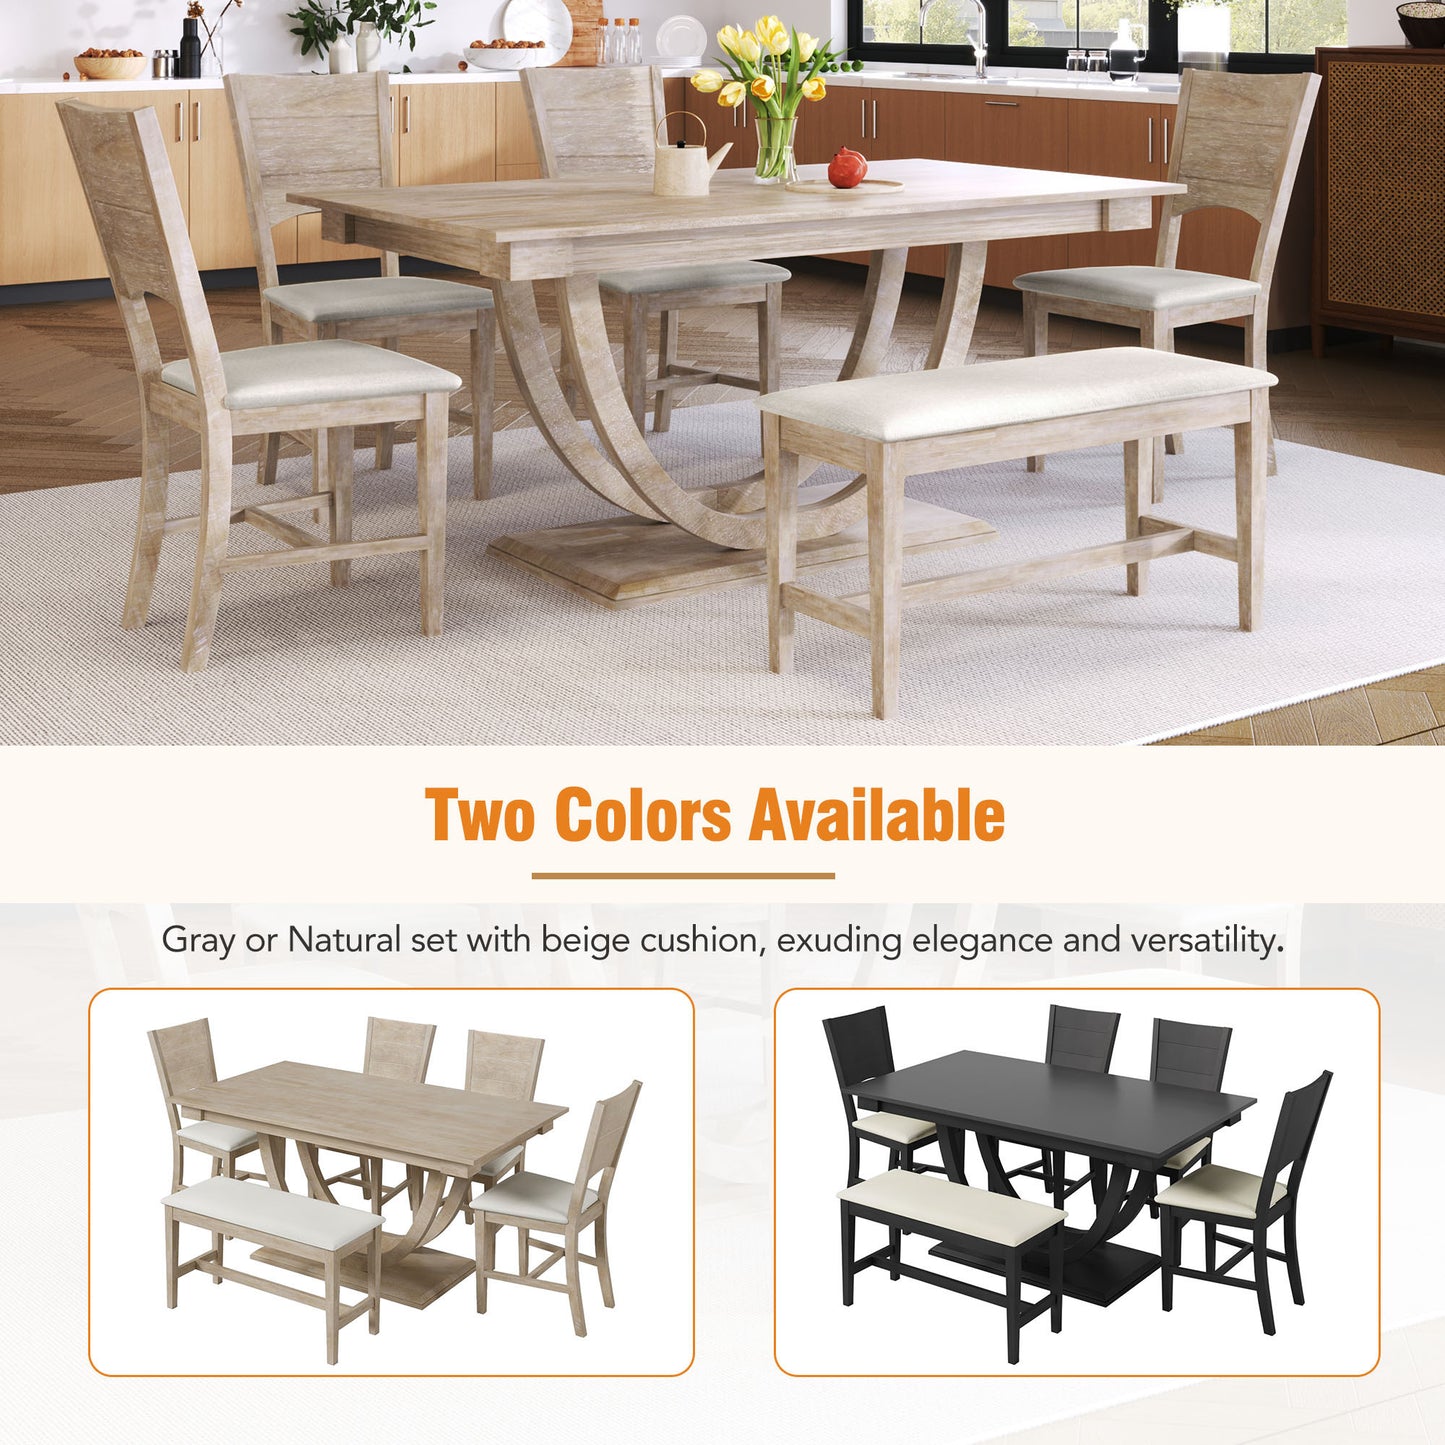 TOPMAX 6-Piece Wood Half Round Dining Table Set Kitchen Table Set with Long Bench and 4 Dining Chairs, Modern Style, Natural